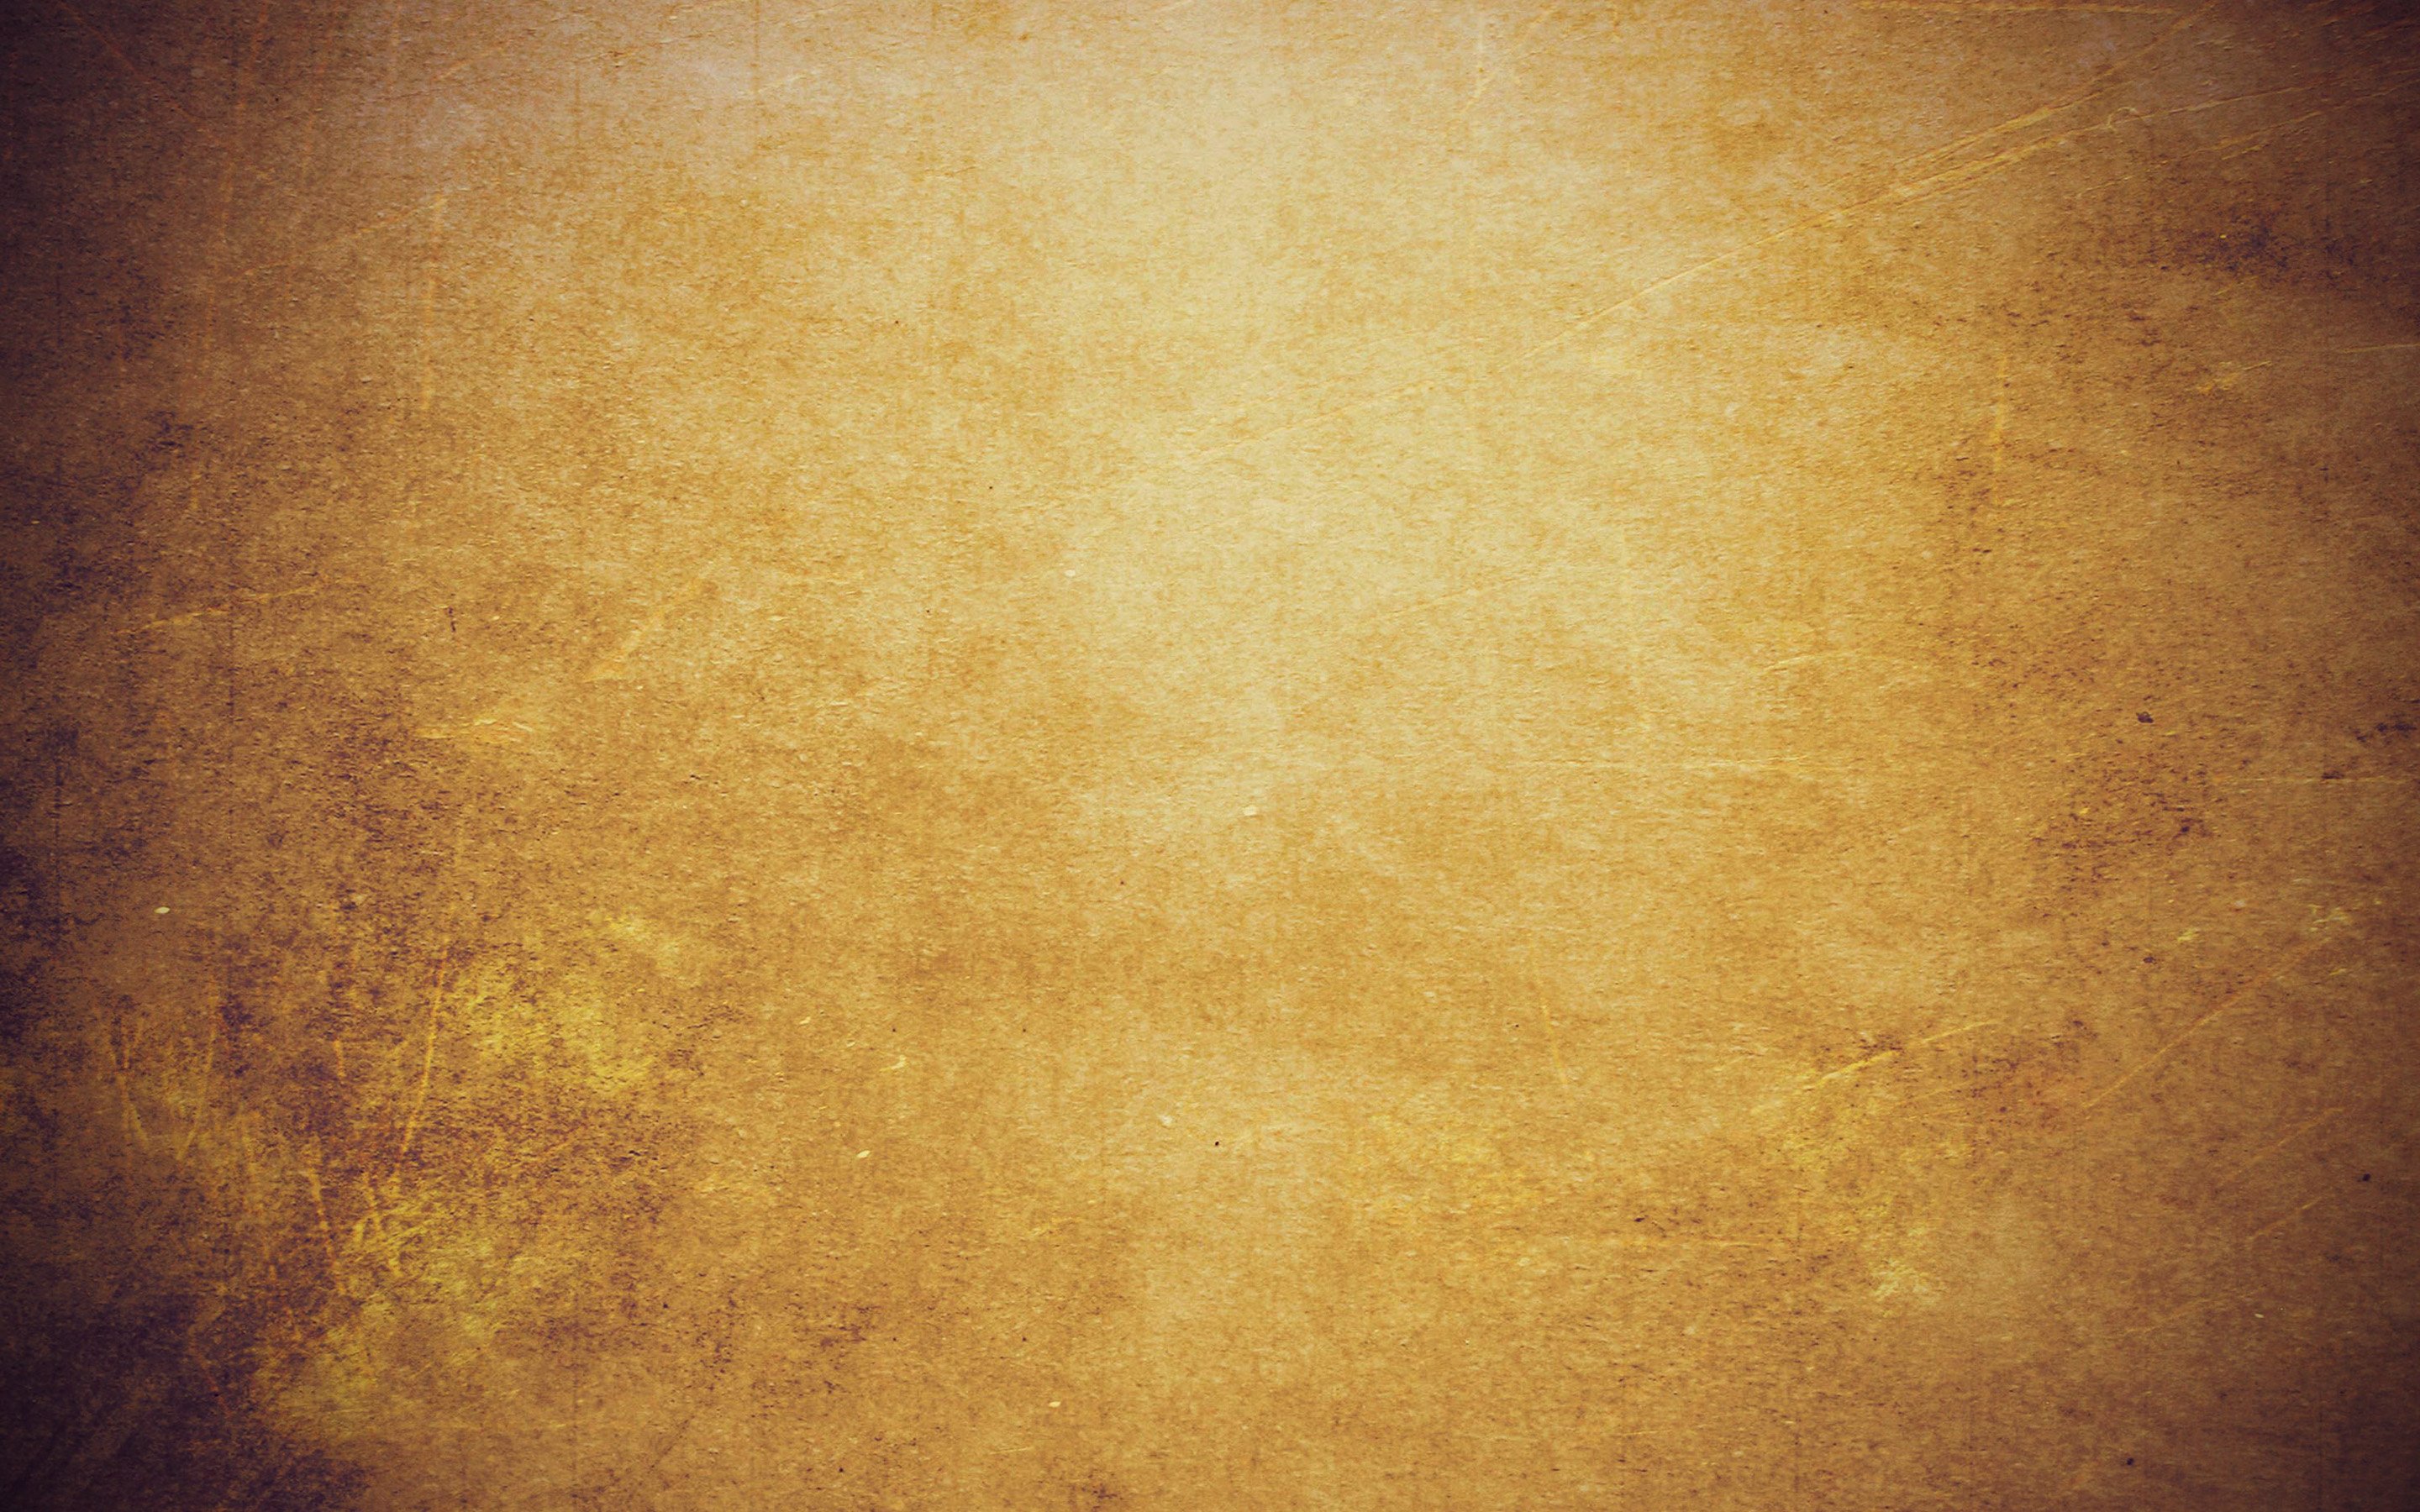 Download wallpapers brown grunge texture, grunge background, grunge paper  texture, creative backgrounds for desktop with resolution 2880x1800. High  Quality HD pictures wallpapers